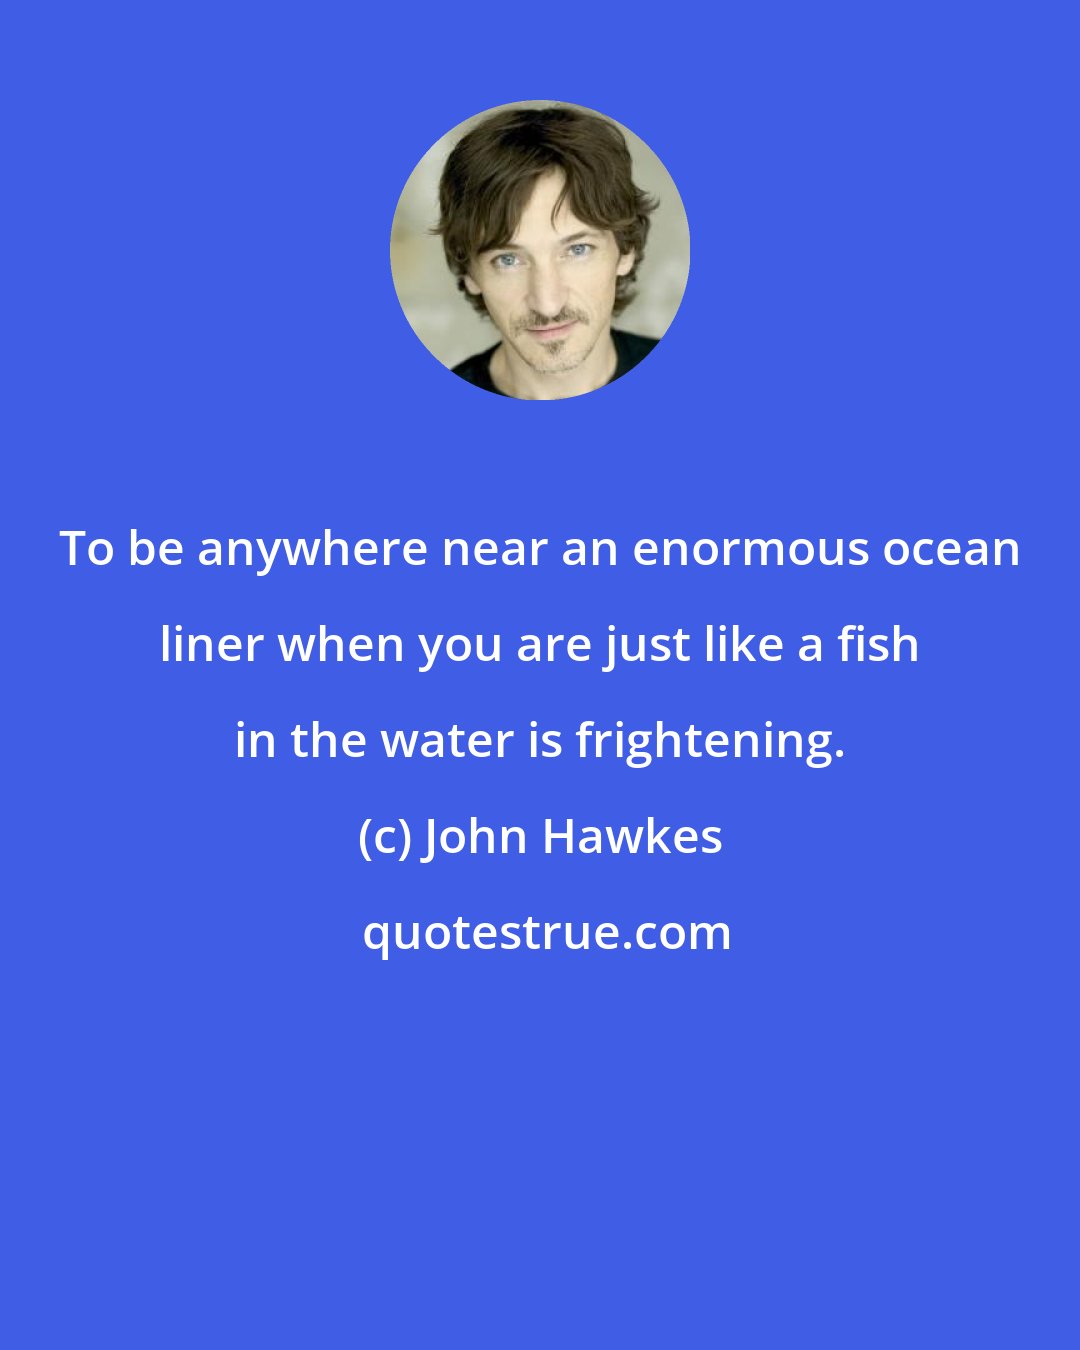 John Hawkes: To be anywhere near an enormous ocean liner when you are just like a fish in the water is frightening.